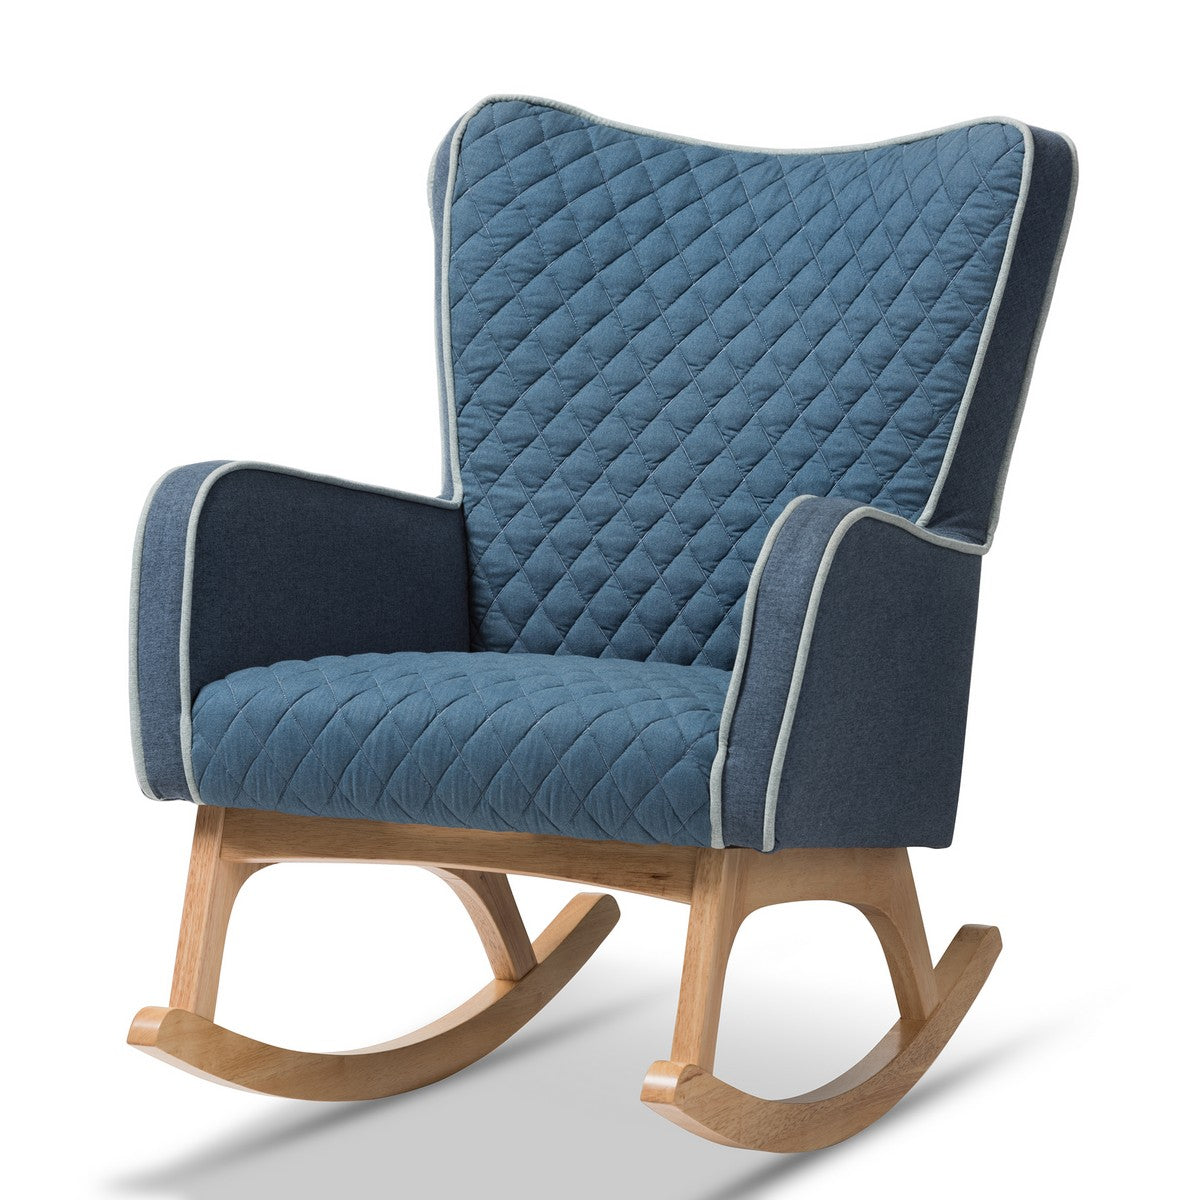 Baxton Studio Zoelle Mid-Century Modern Blue Fabric Upholstered Natural Finished Rocking Chair Baxton Studio-Rocking Chairs-Minimal And Modern - 1